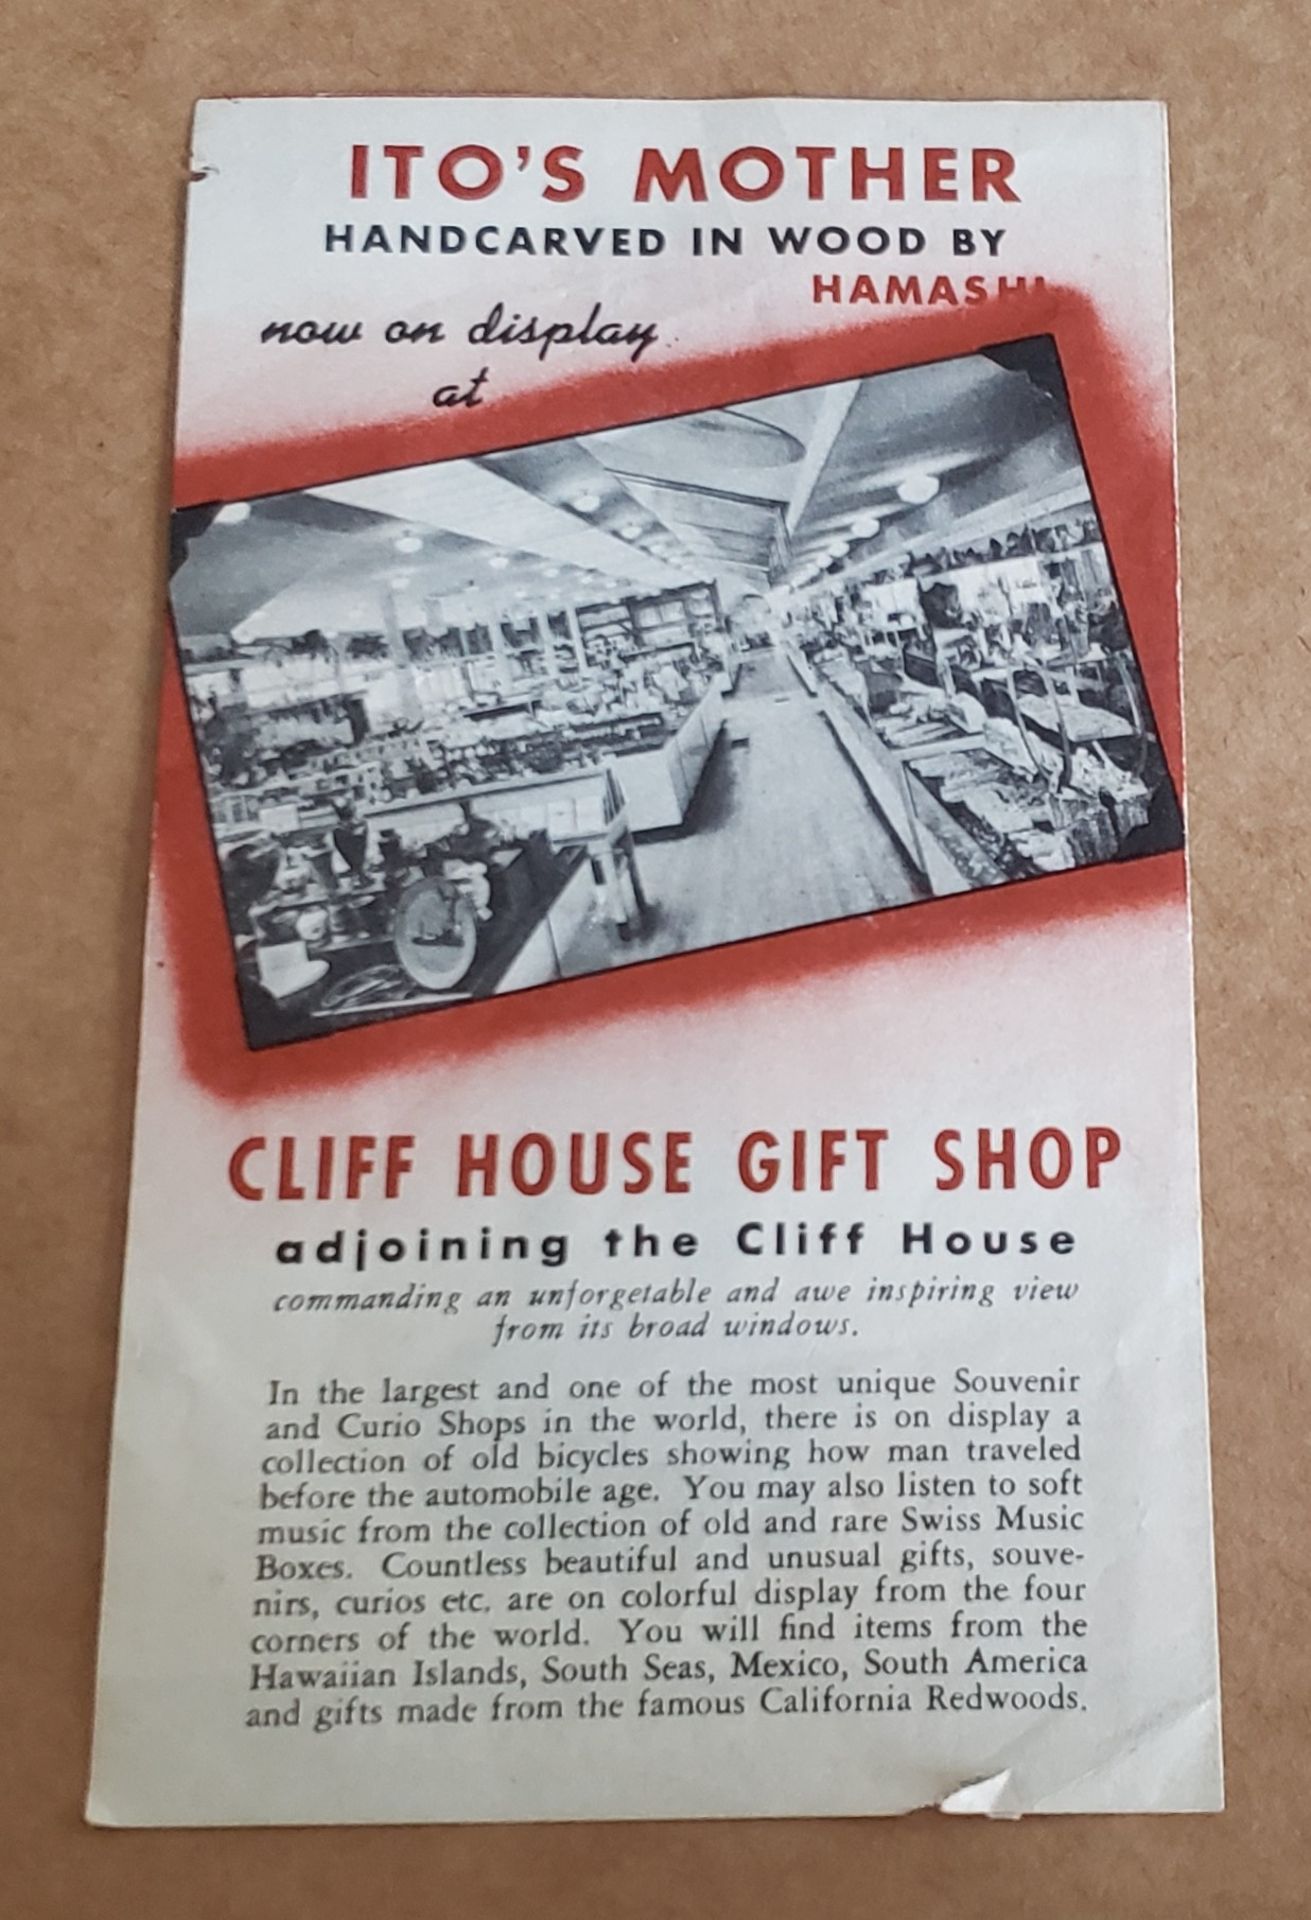 1940s Ito Hamashi Gift House Brochure from the Cliff House - Image 2 of 2